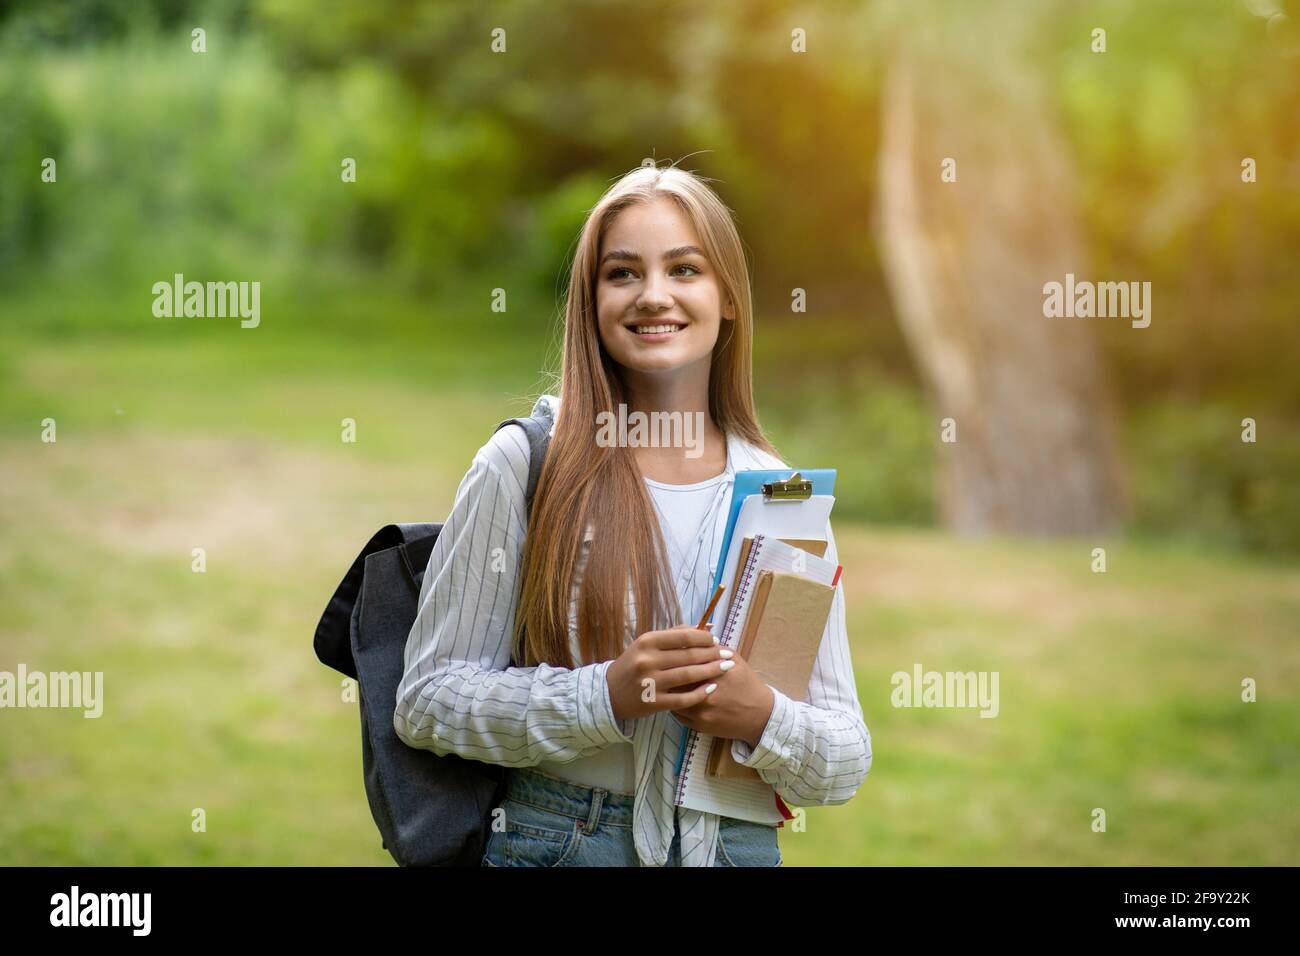 Freshman Girl. Beautiful Female College Student With Workbooks And Backpack Posing Outdoors Stock Photo